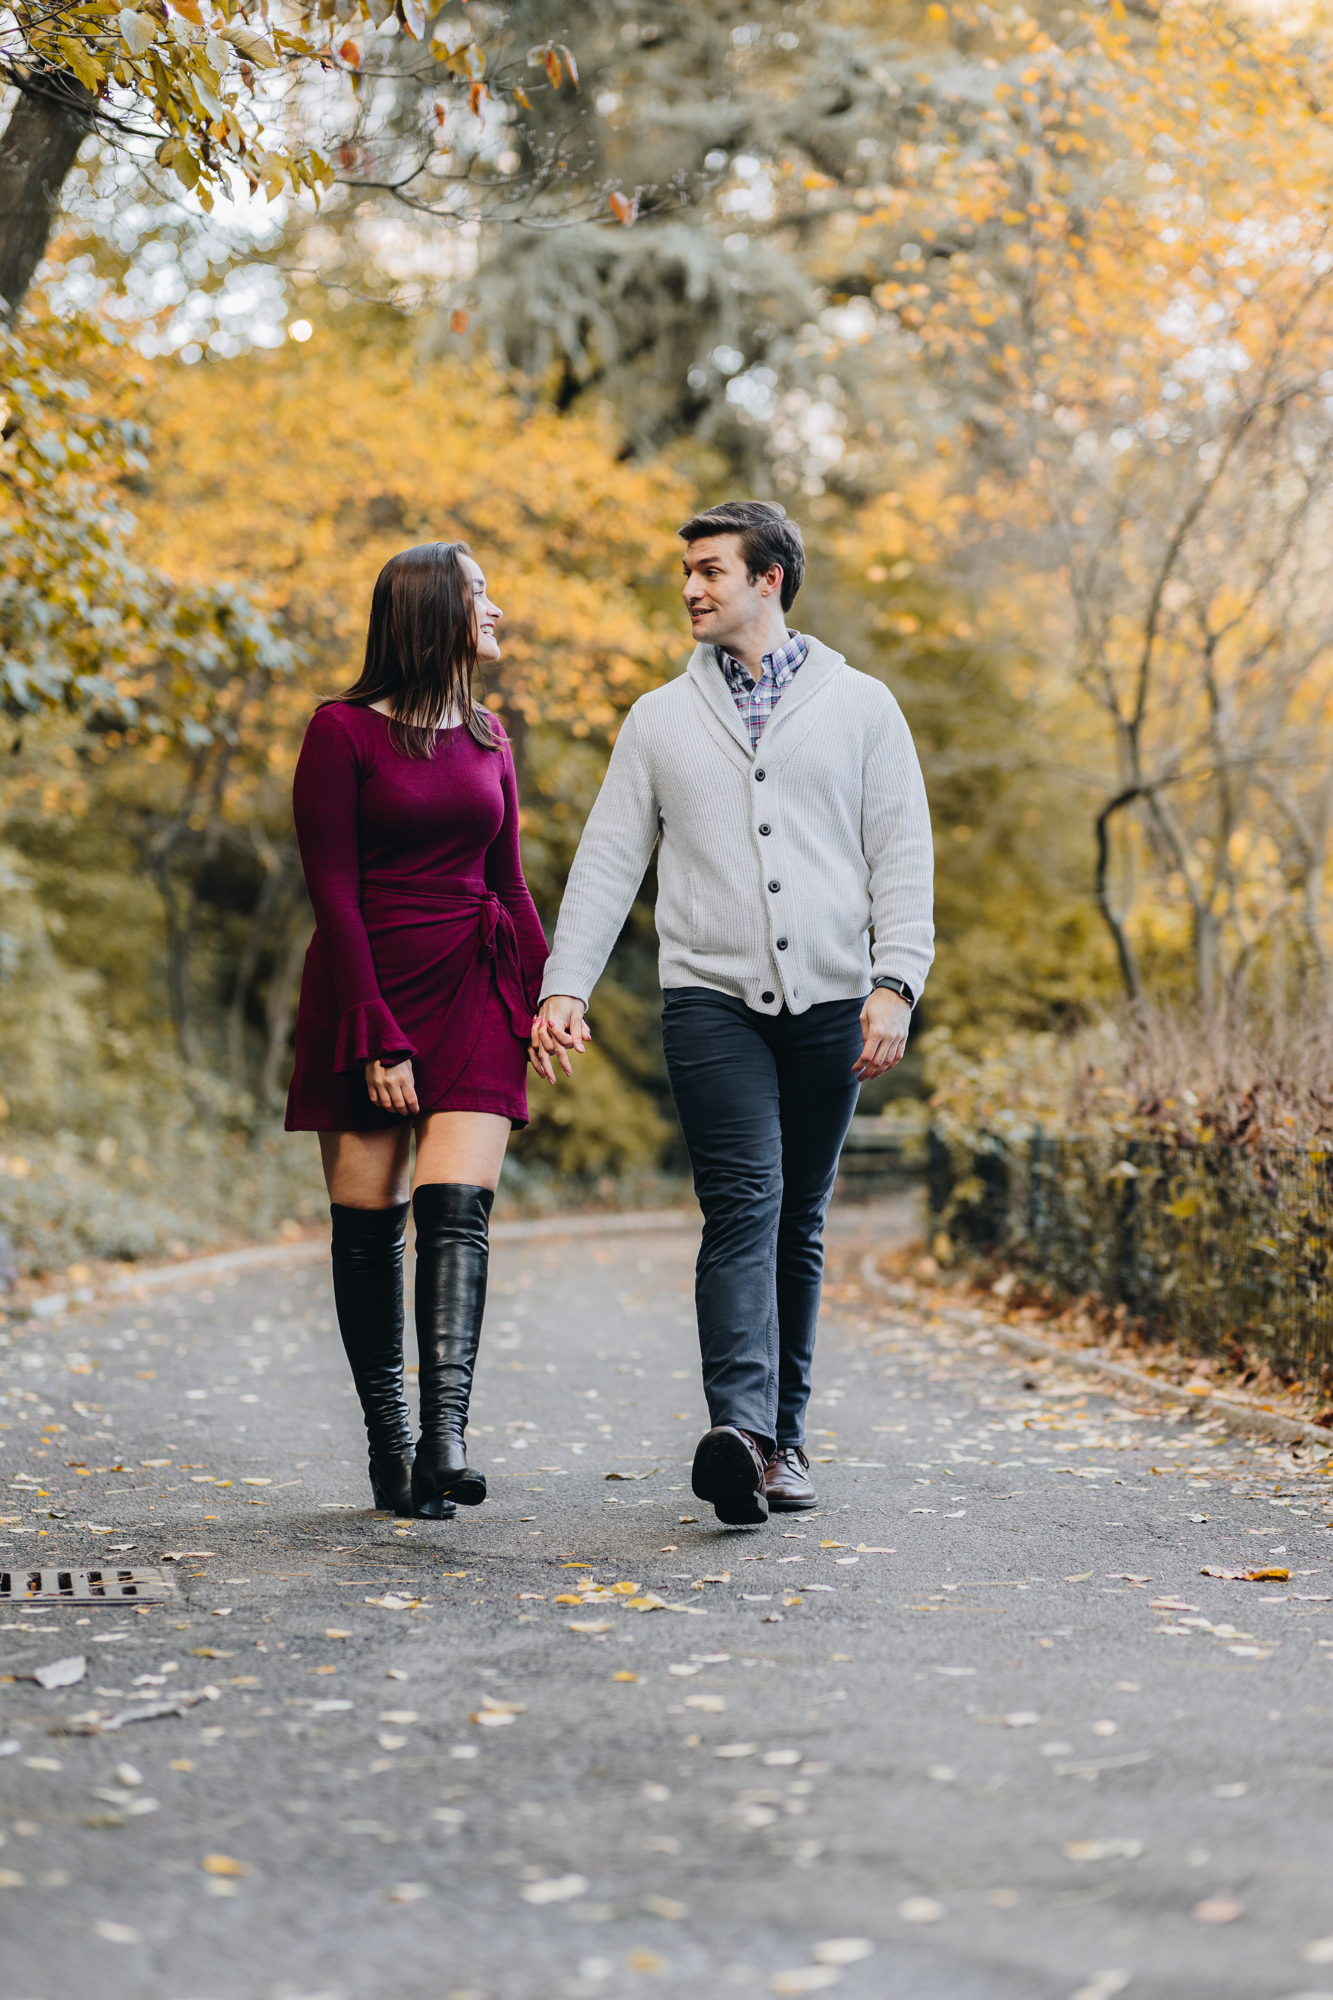 Documentary Fall Engagement Photos in Central Park New York